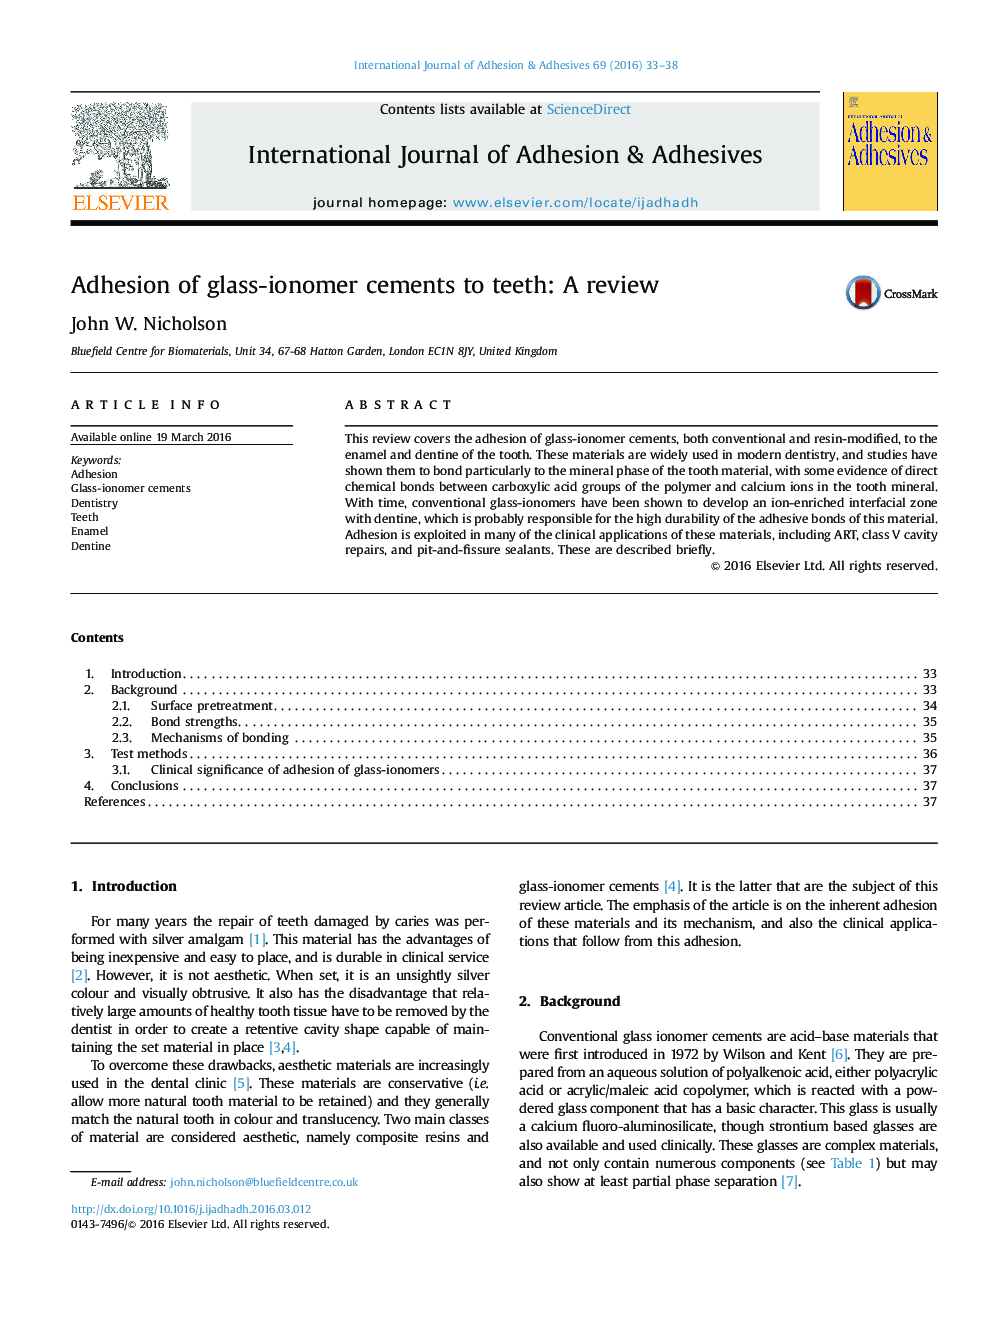 Adhesion of glass-ionomer cements to teeth: A review